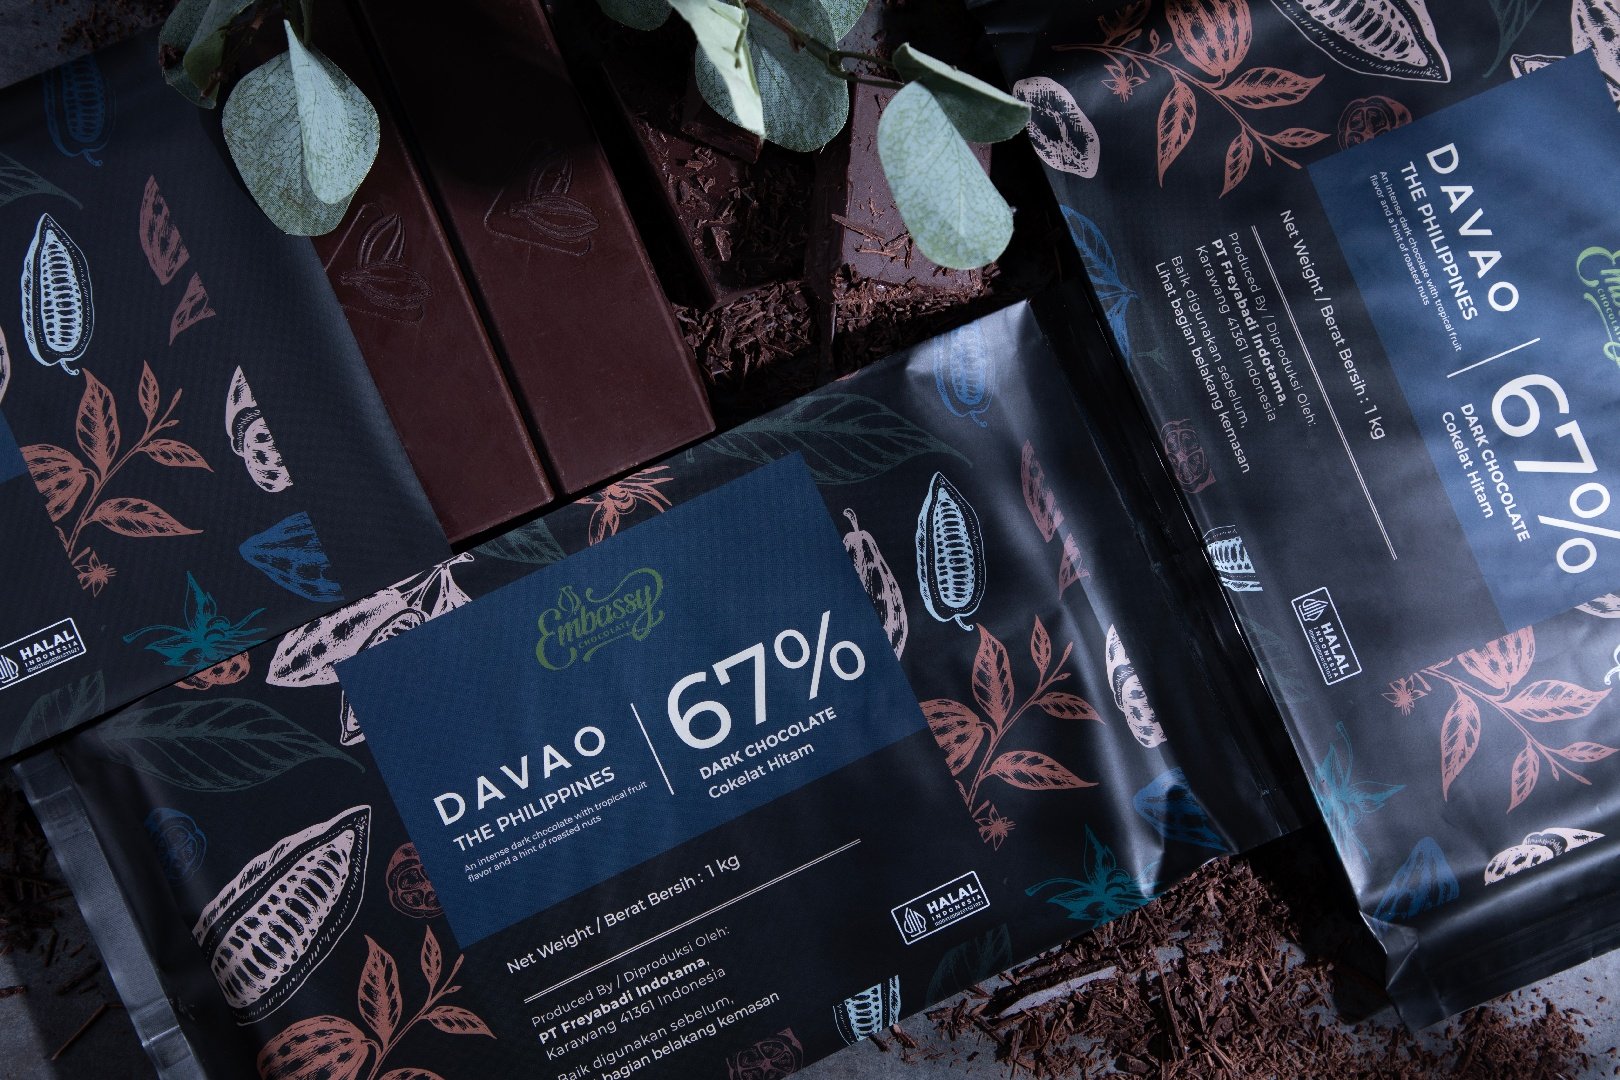 Embassy Single Origin: The First Bean-to-Bar Chocolate from Embassy Chocolate